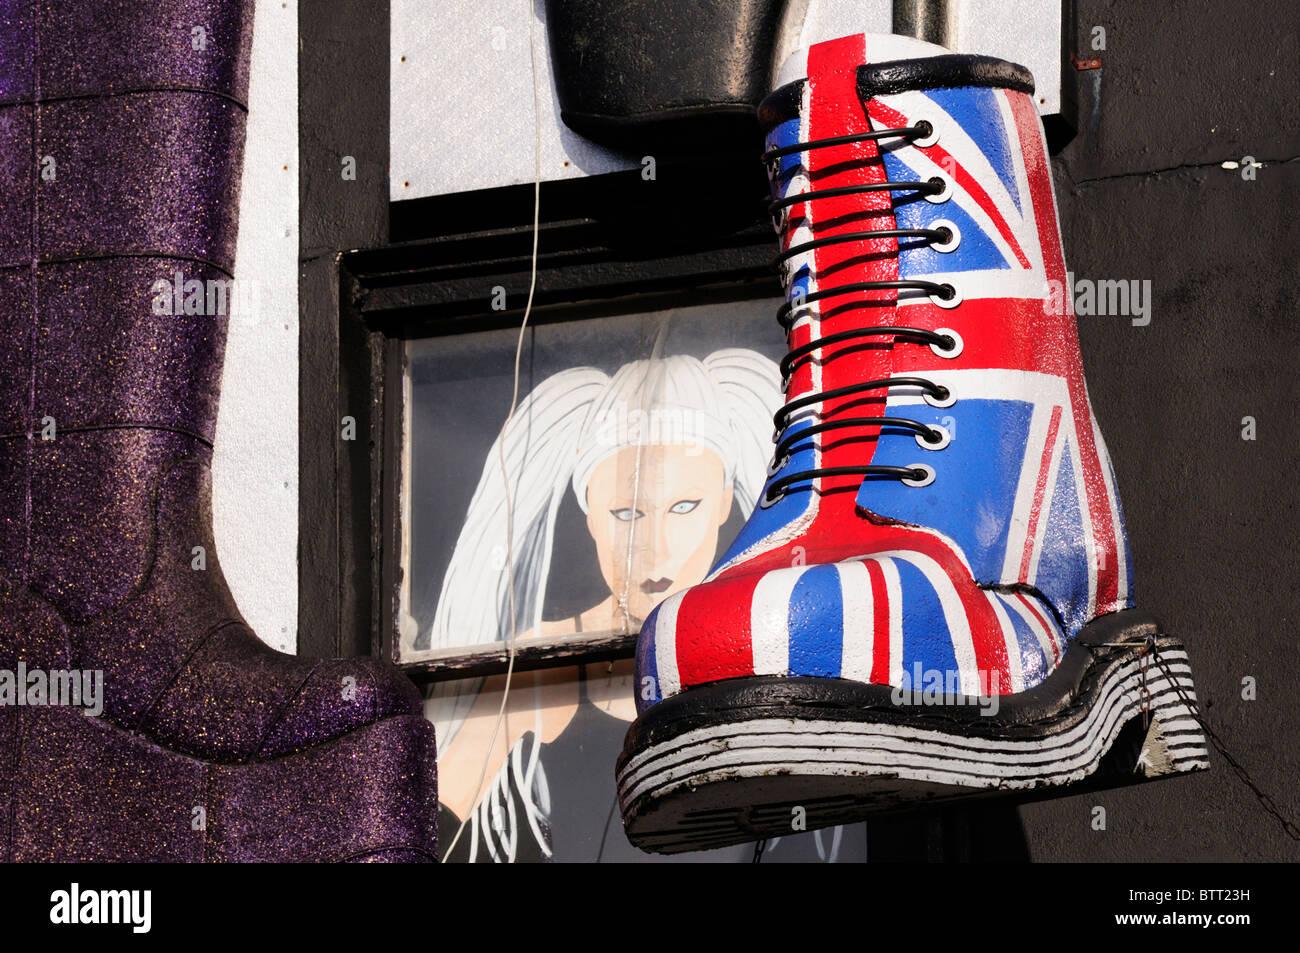 A Giant Union Jack Dr Martens boot above a shop in Camden High Street, London, England, UK Stock Photo